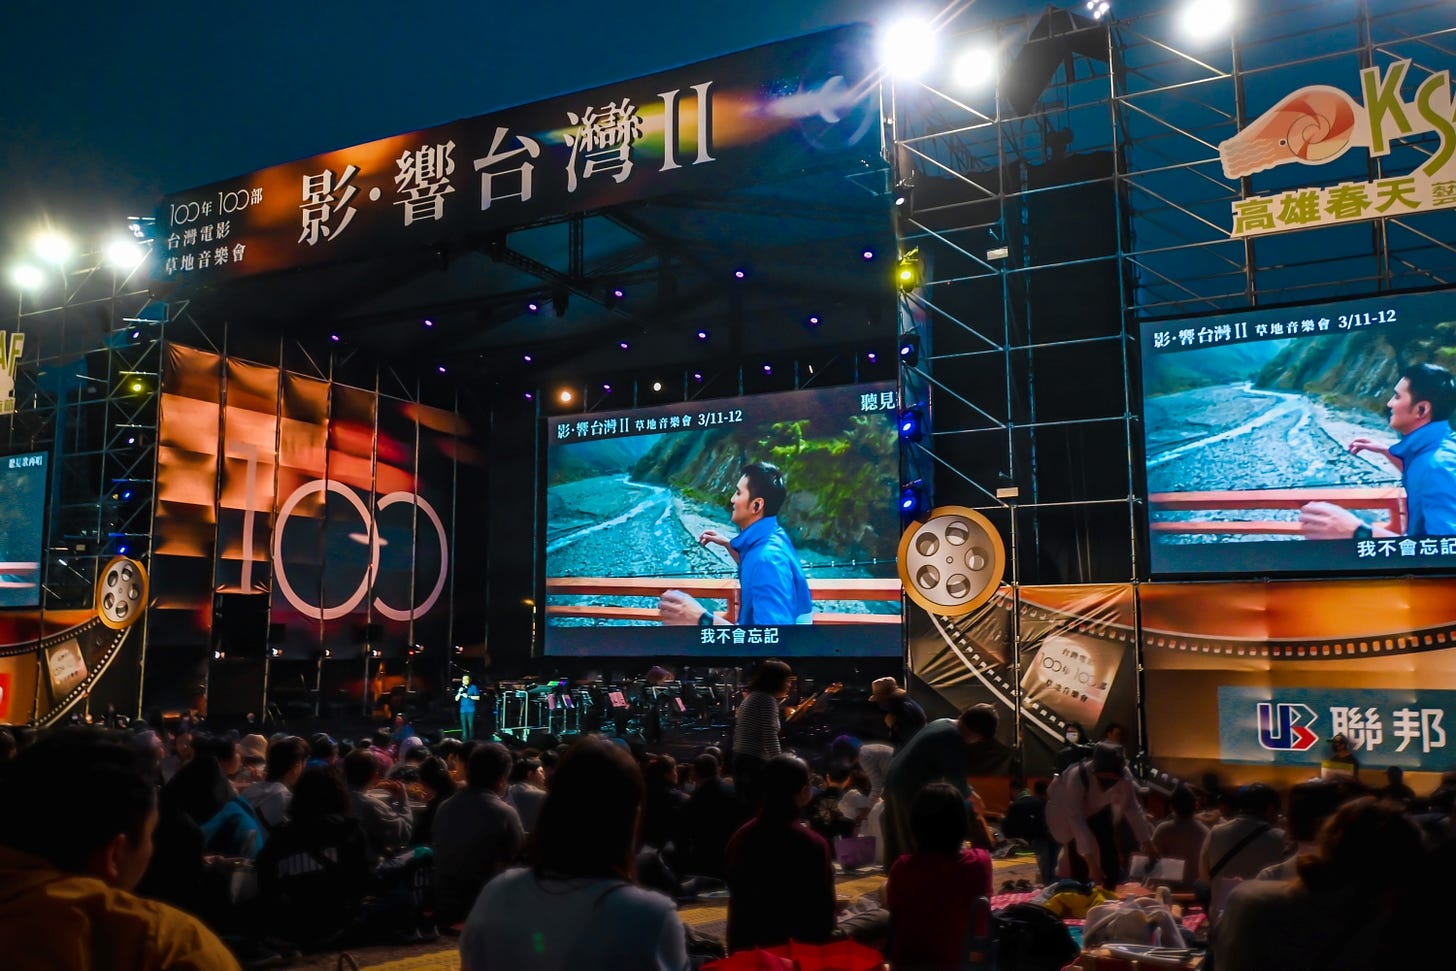 The stage at the 2023 Kaohsiung Spring Arts Festival centered on projection screens broadcasting classic Taiwanese films